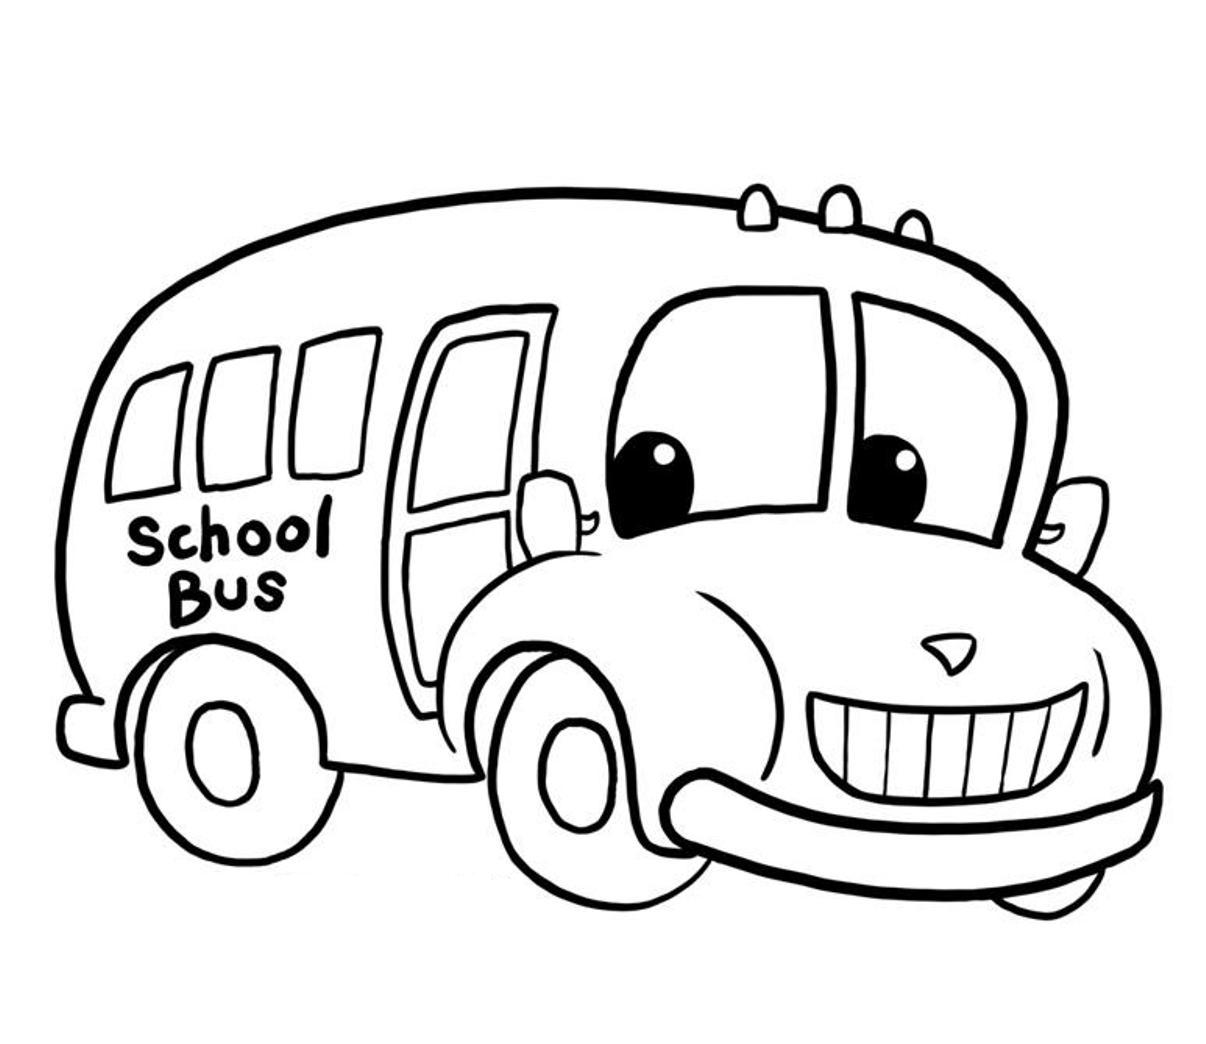 Bus coloring pages to download and print for free